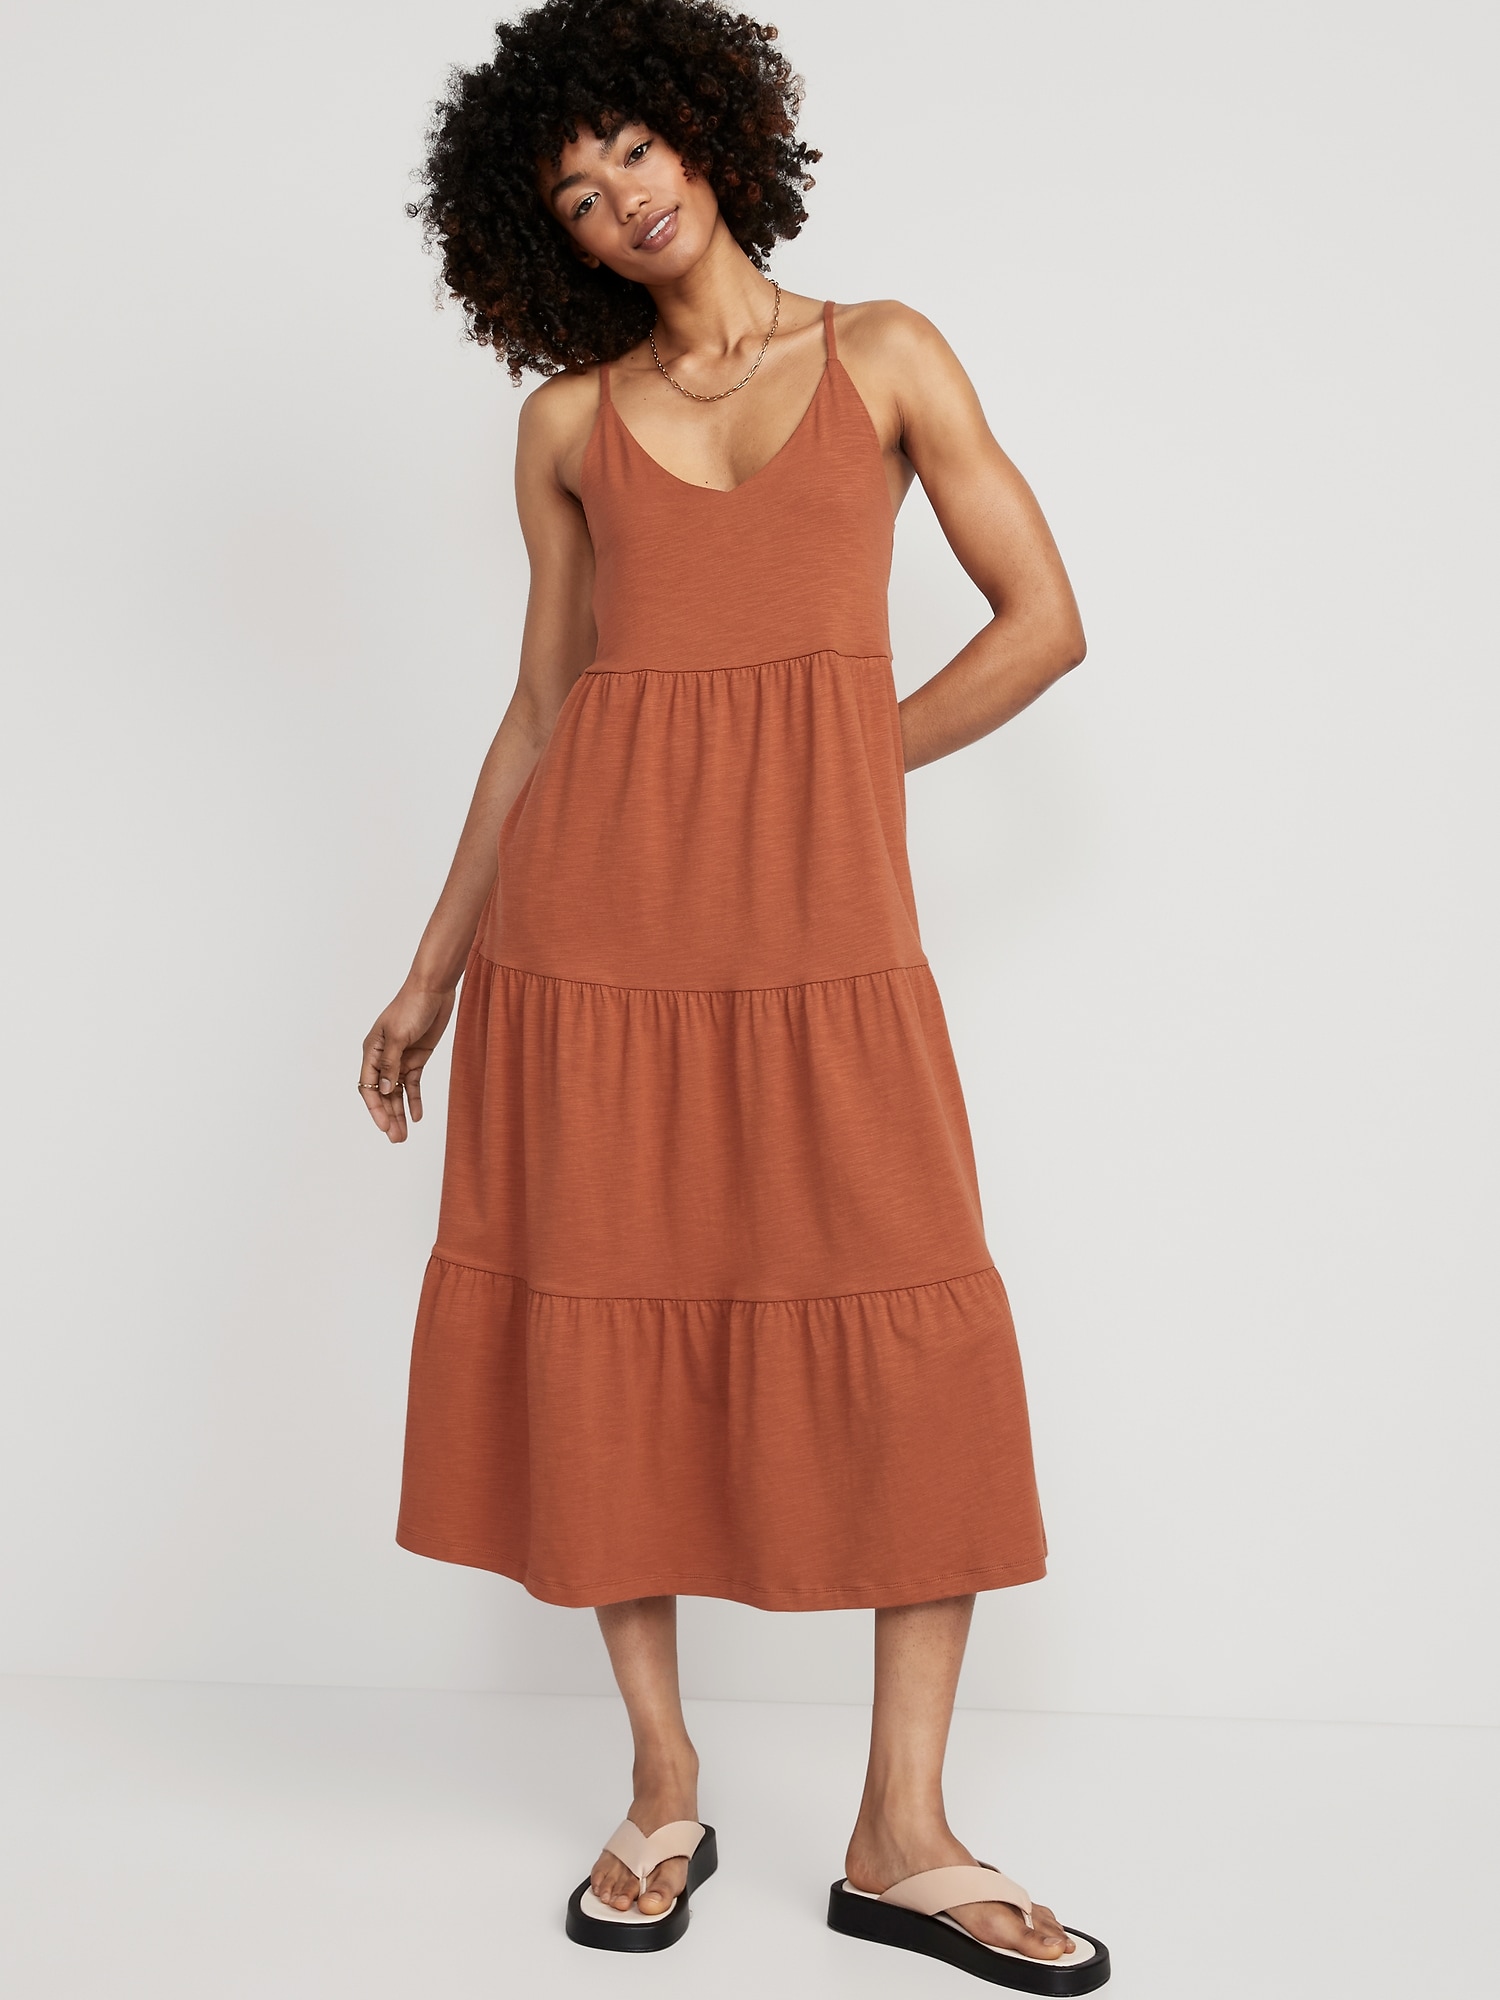 old navy dresses womens